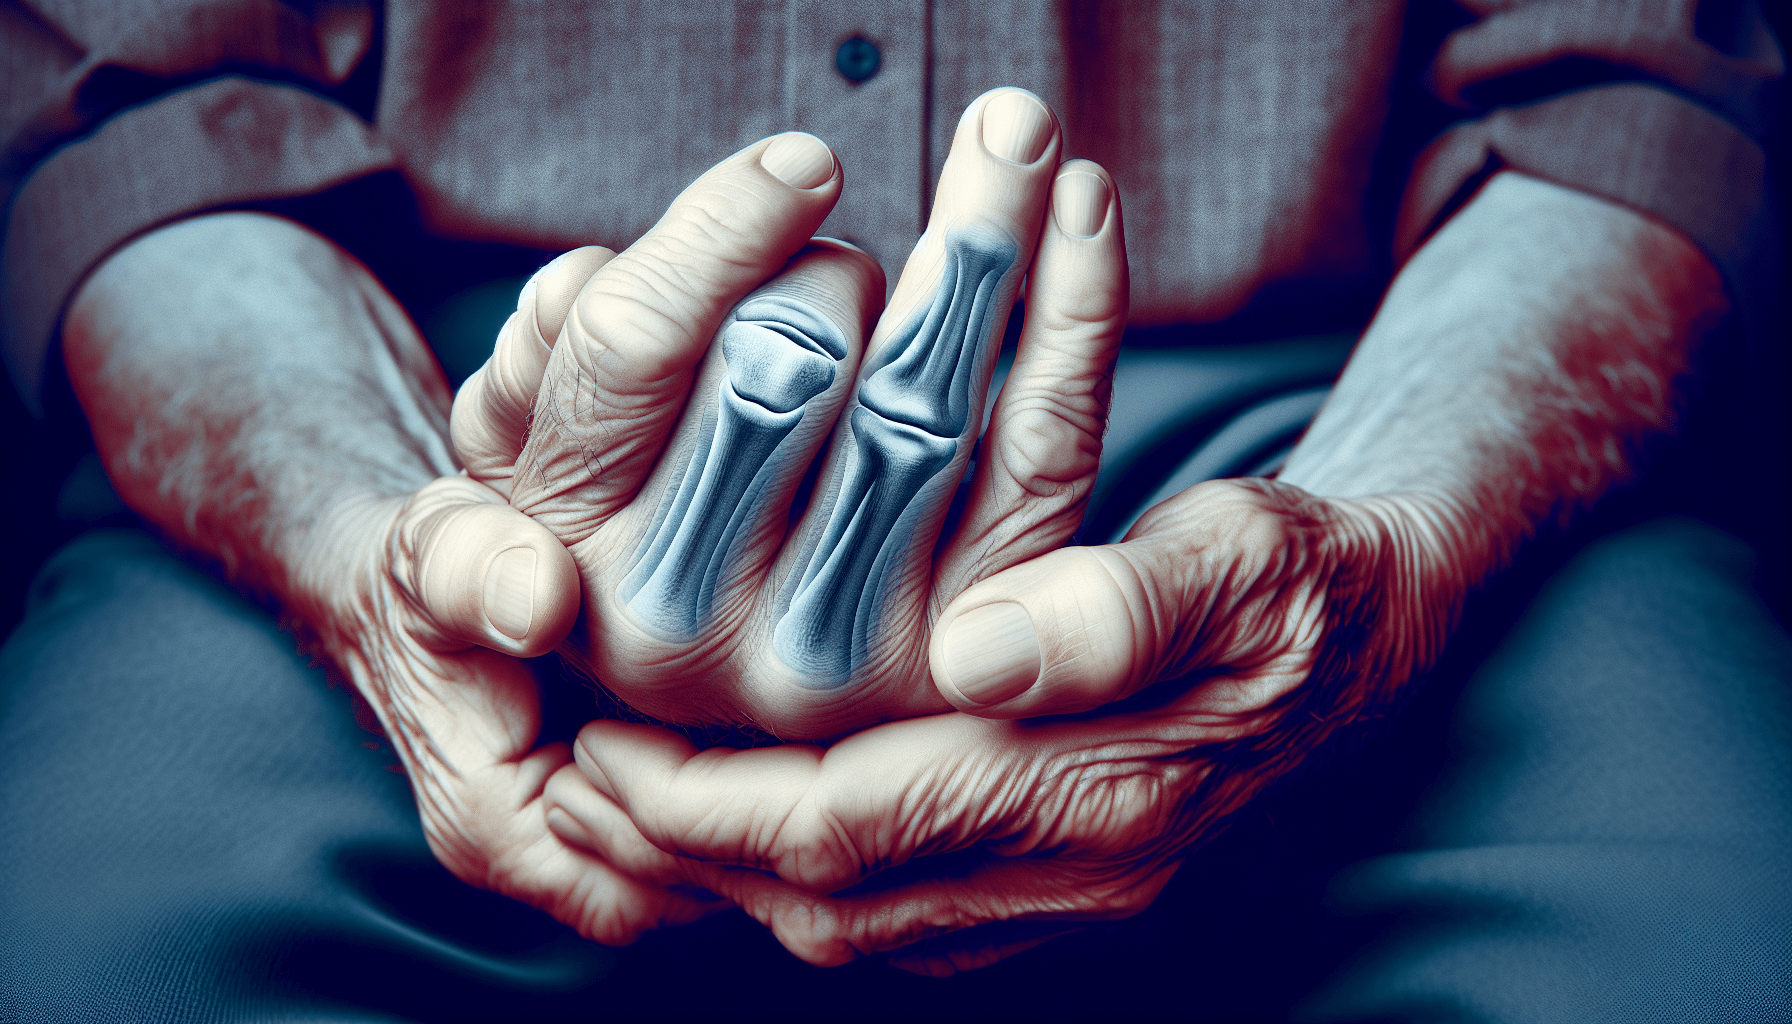 What Is The Most Effective Treatment For Arthritis?